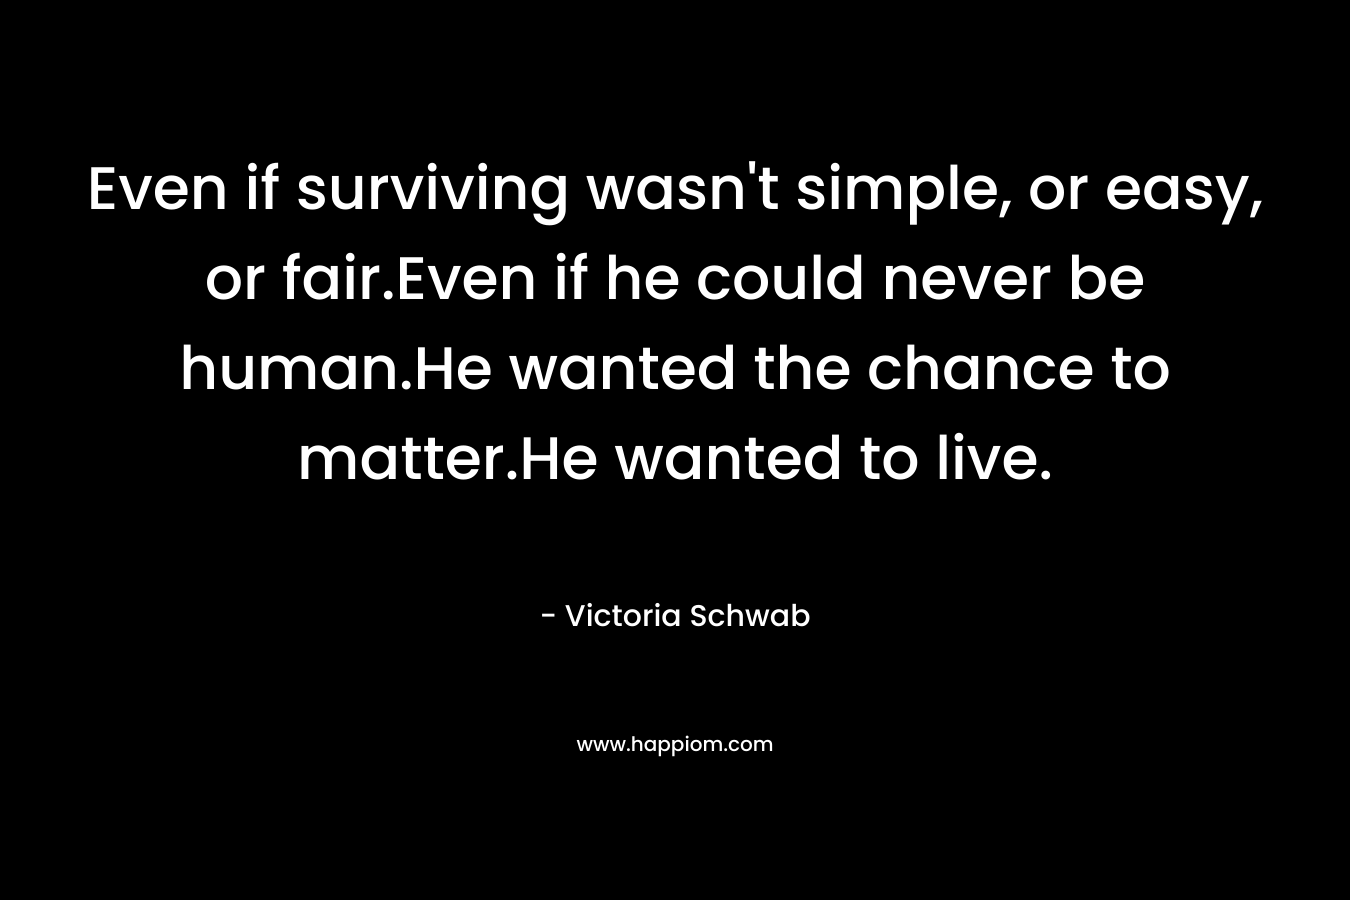 Even if surviving wasn't simple, or easy, or fair.Even if he could never be human.He wanted the chance to matter.He wanted to live.